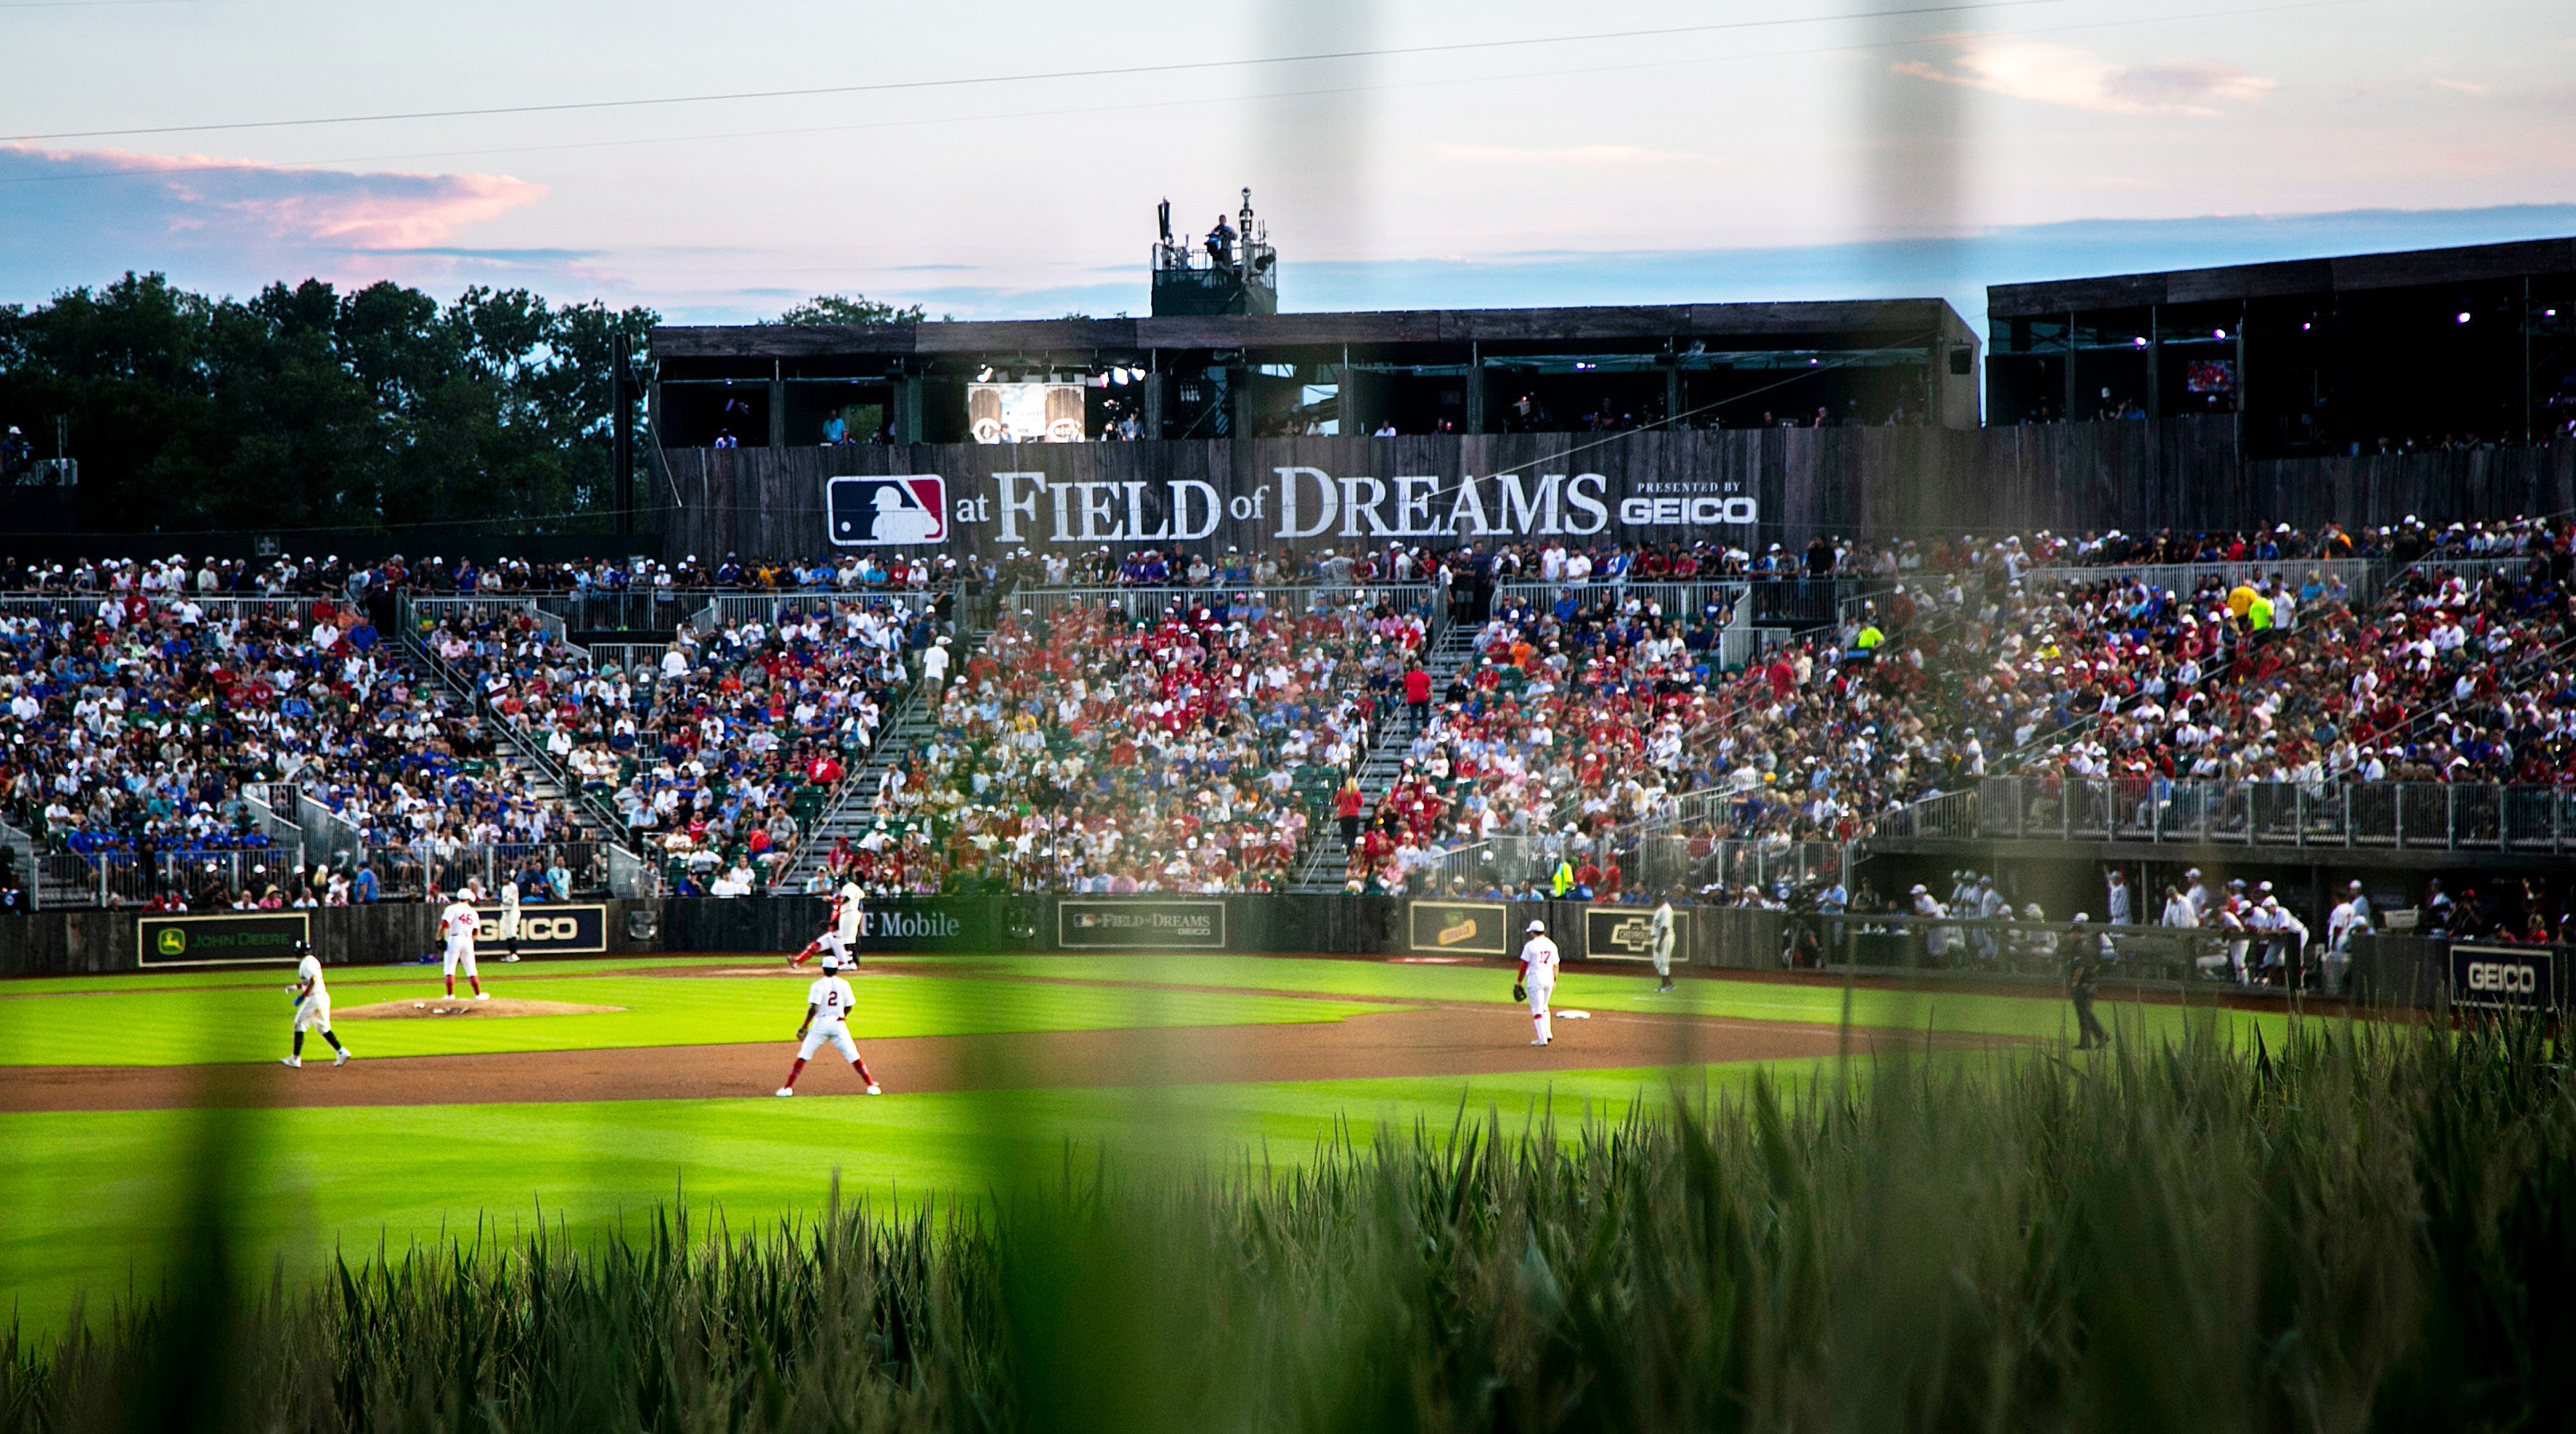 Field of Dreams game gives MLB players chance to be tourists in Iowa